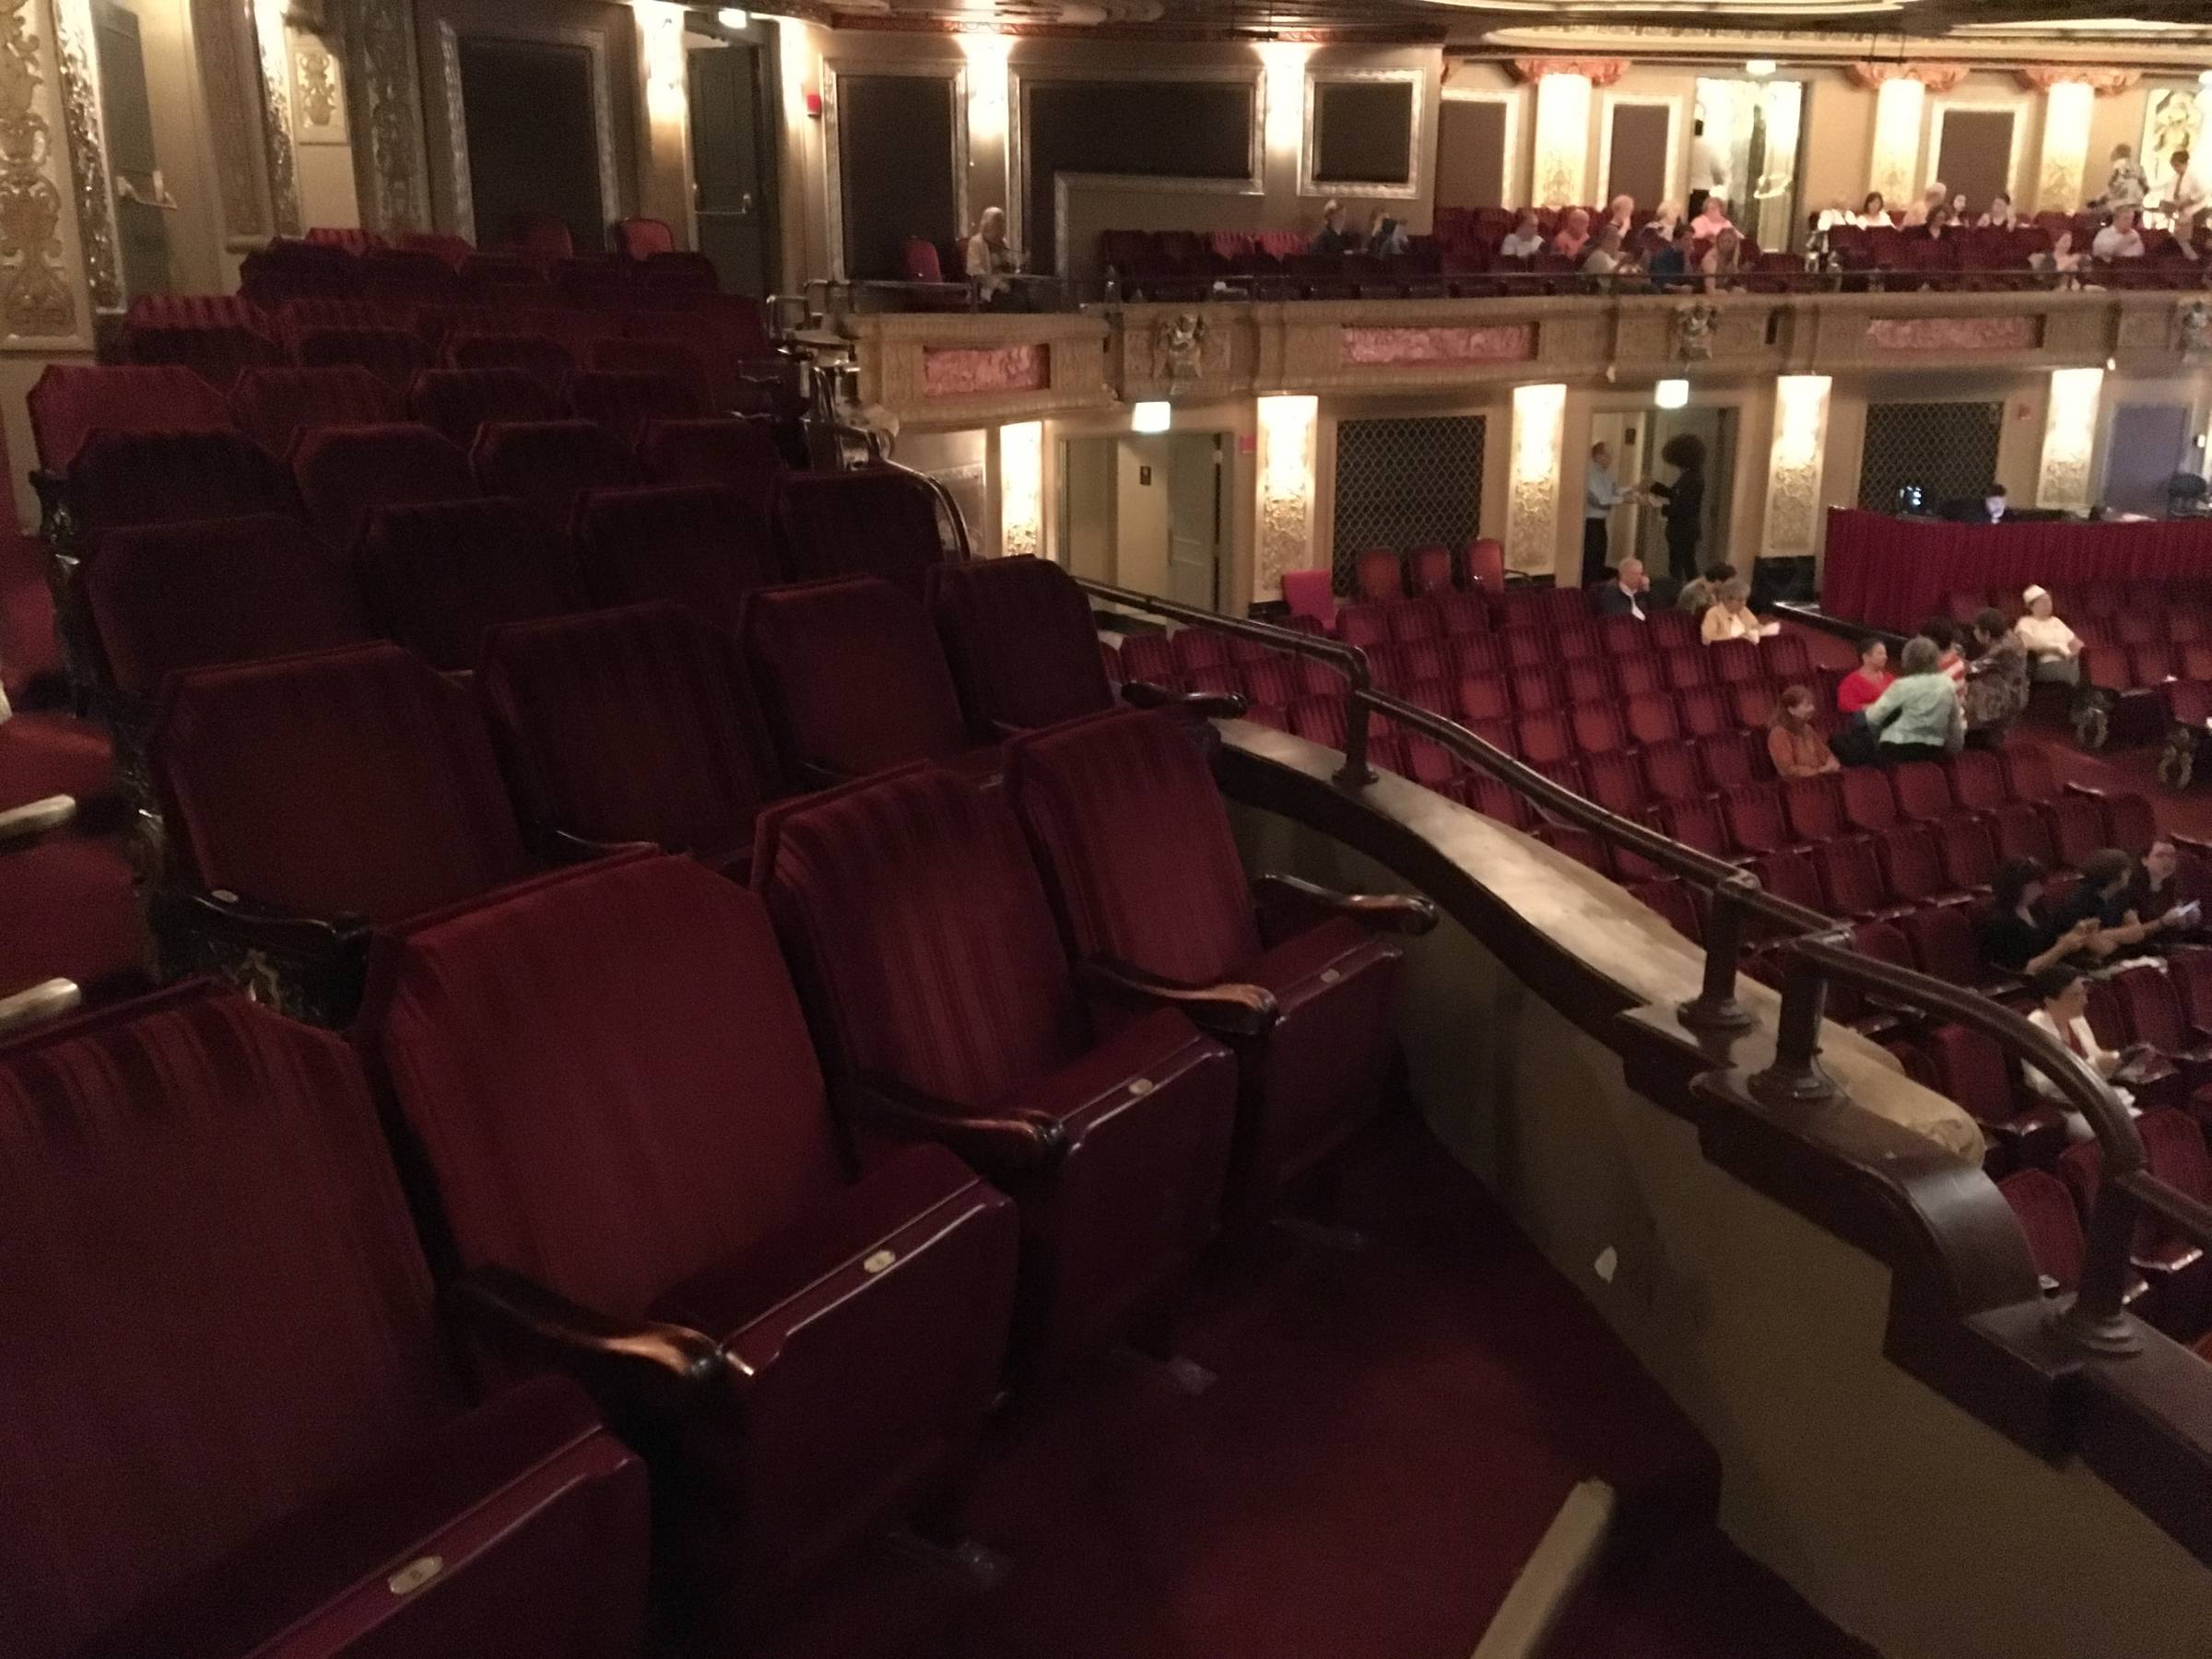 View of right side dress circle seats at Nederlander Theatre